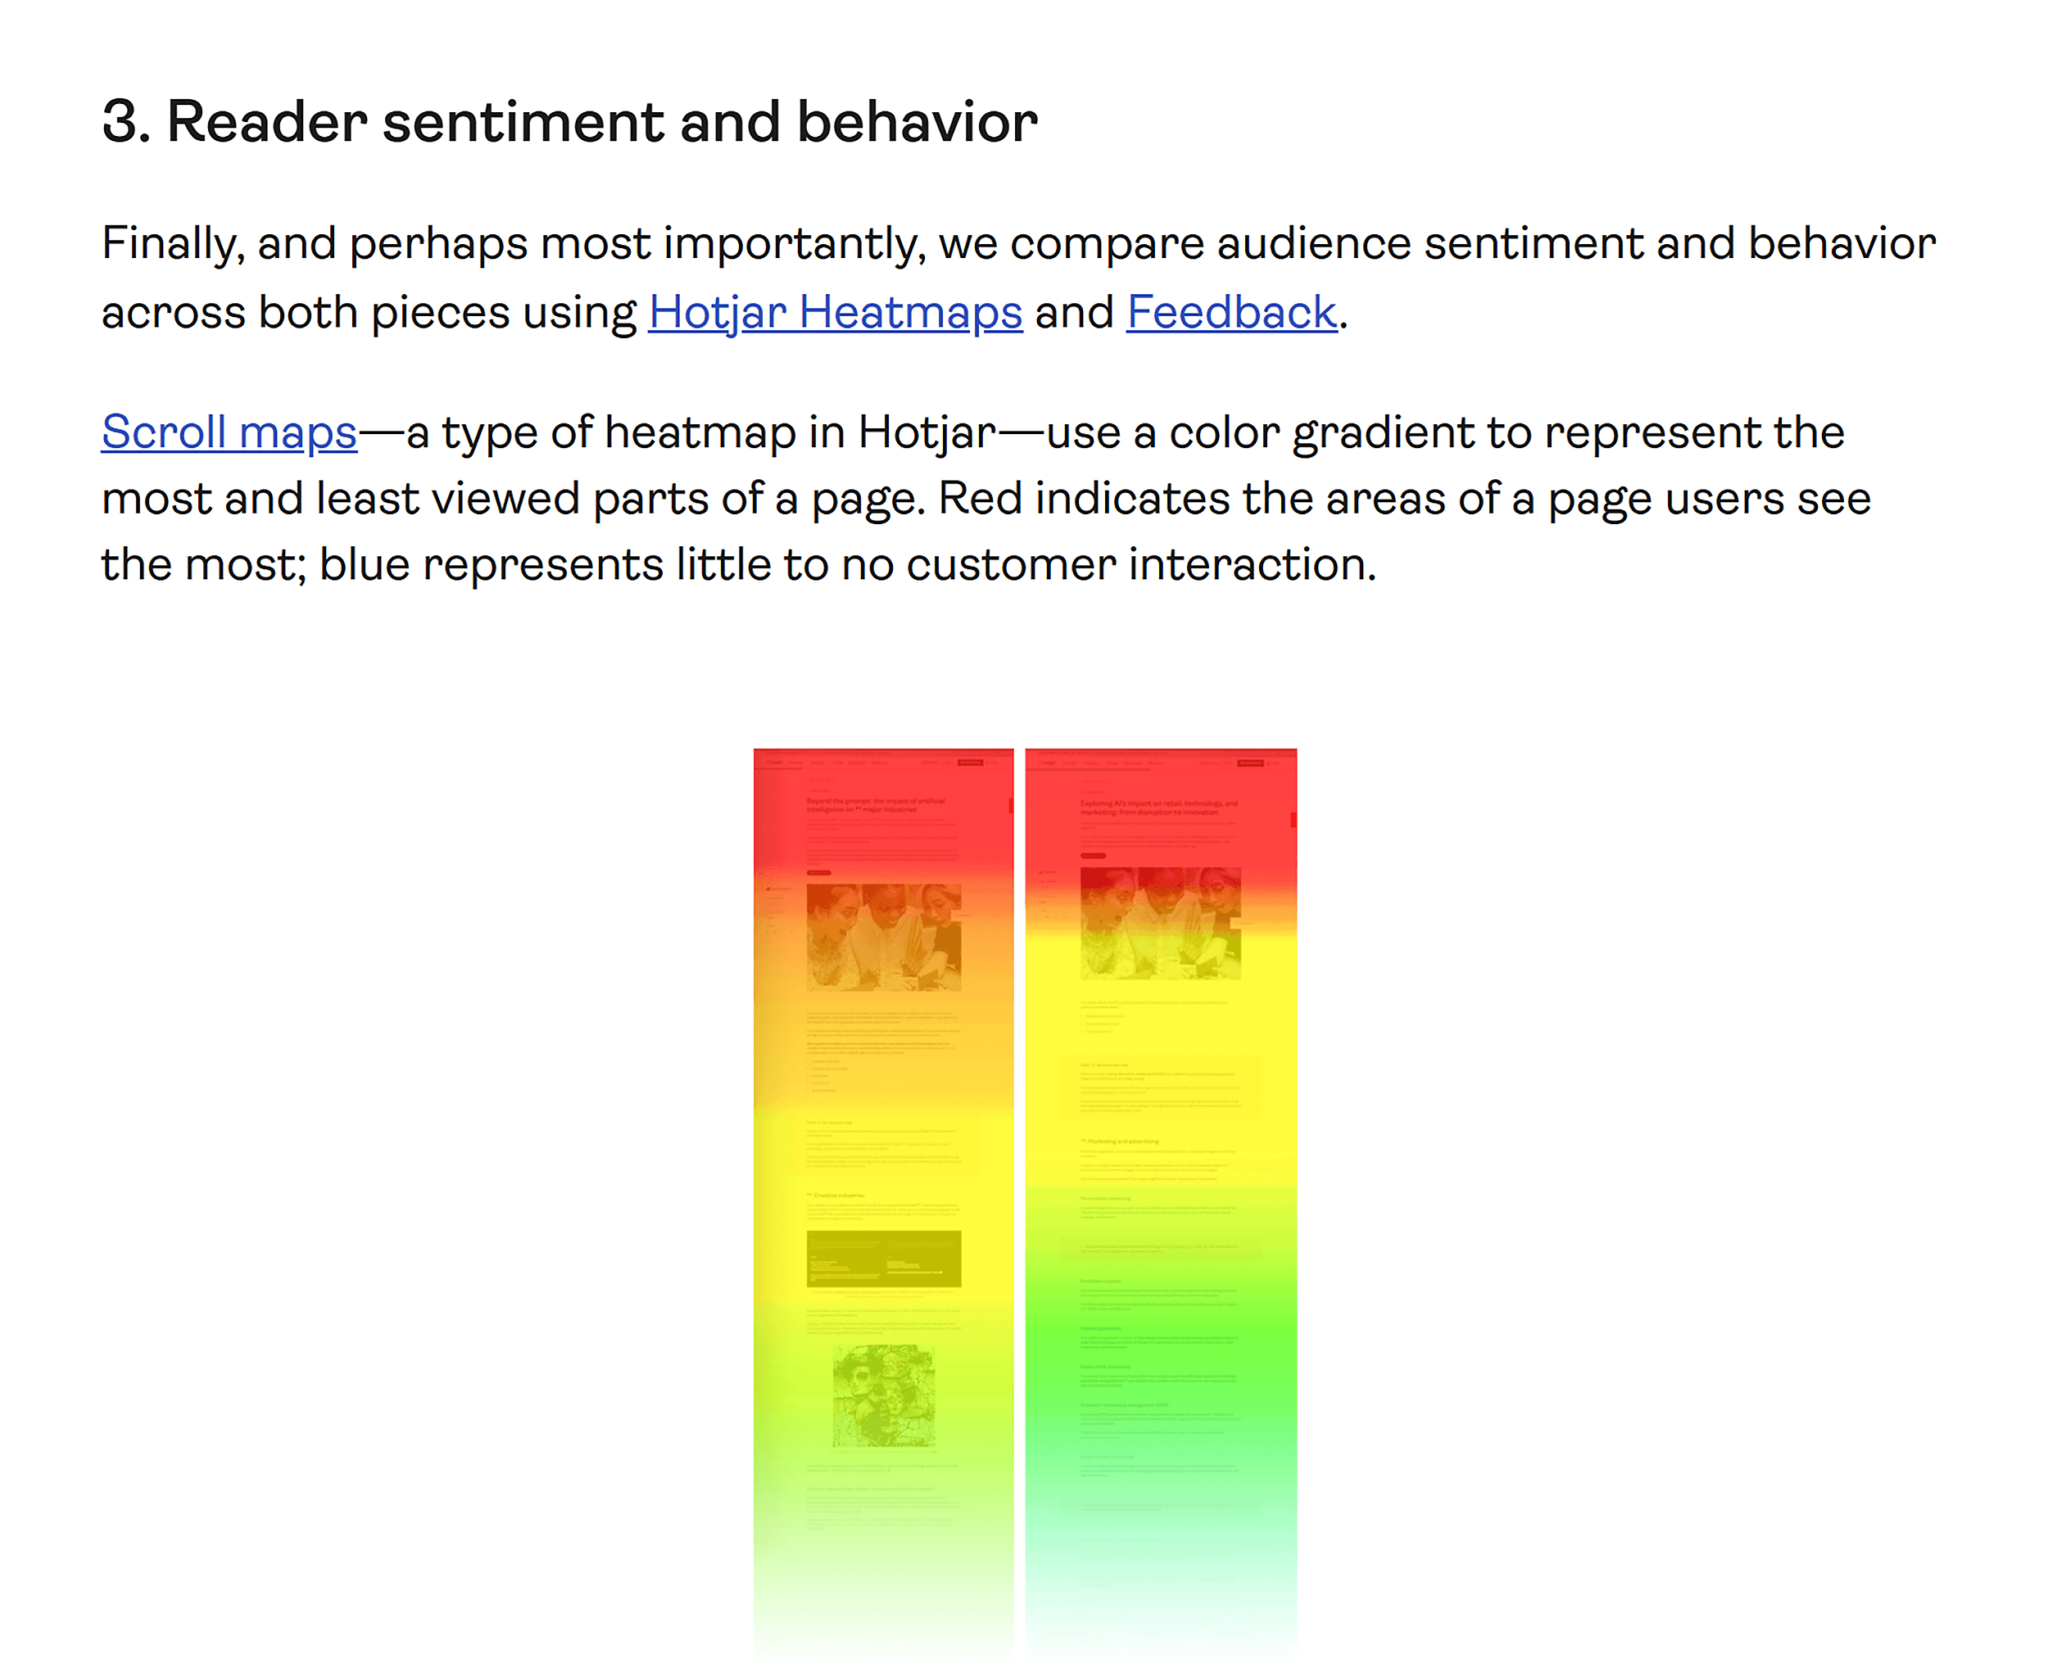 hotjar-reader-sentiment 22 Content Marketing Examples to Inspire You